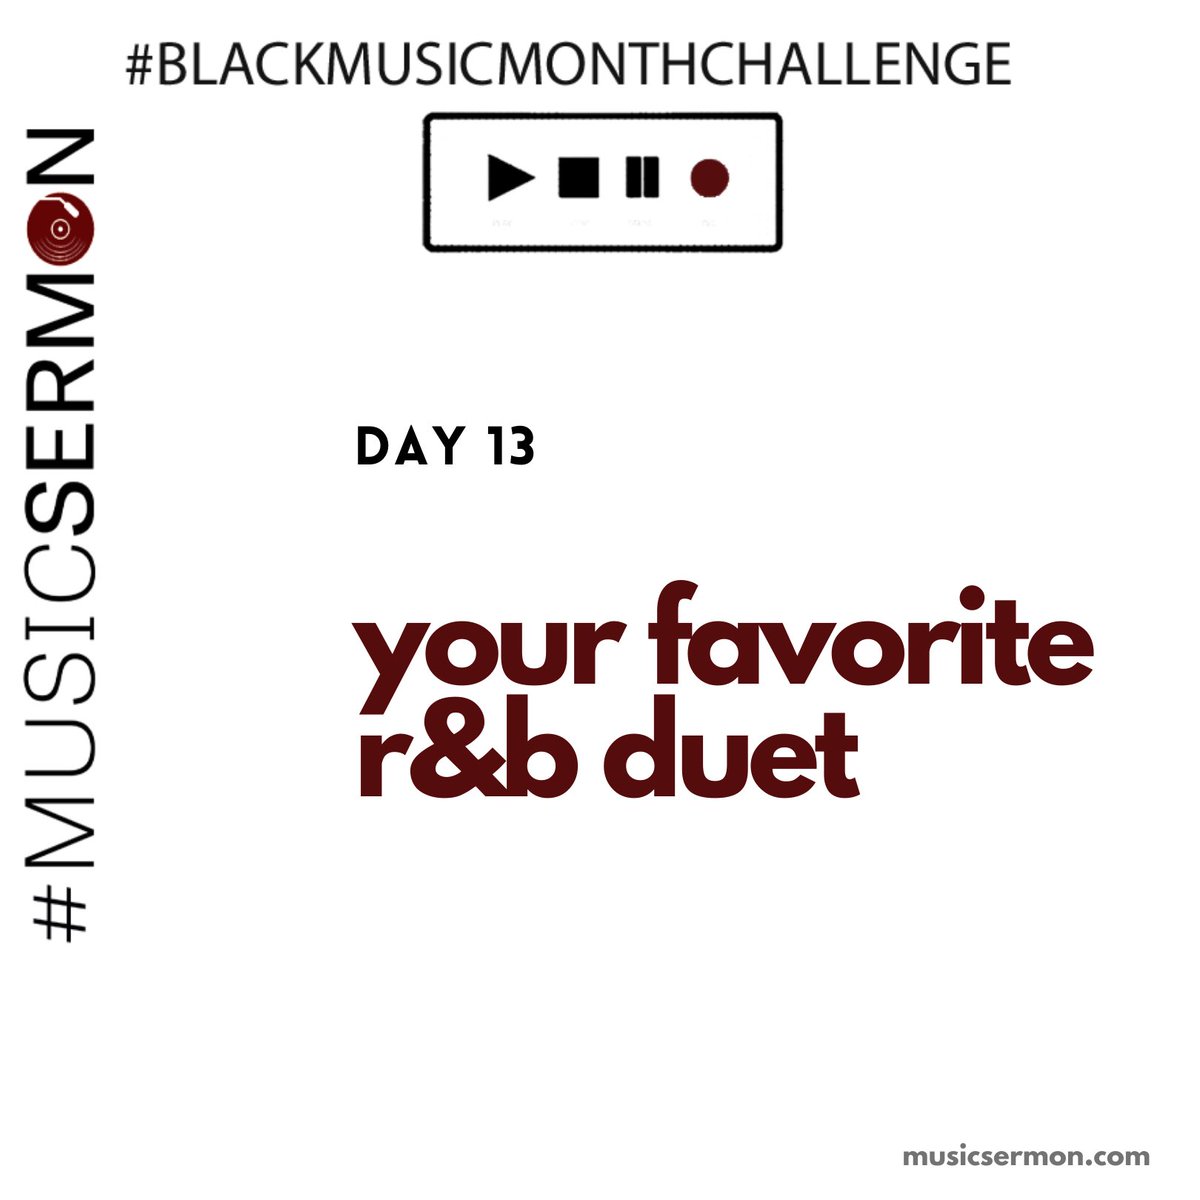 For Day 13 of the  #BlackMusicMonthChallenge, we’re celebrating the R&B duet - currently an endangered musical species (which is really sad). Name a duet (or a few) you love.